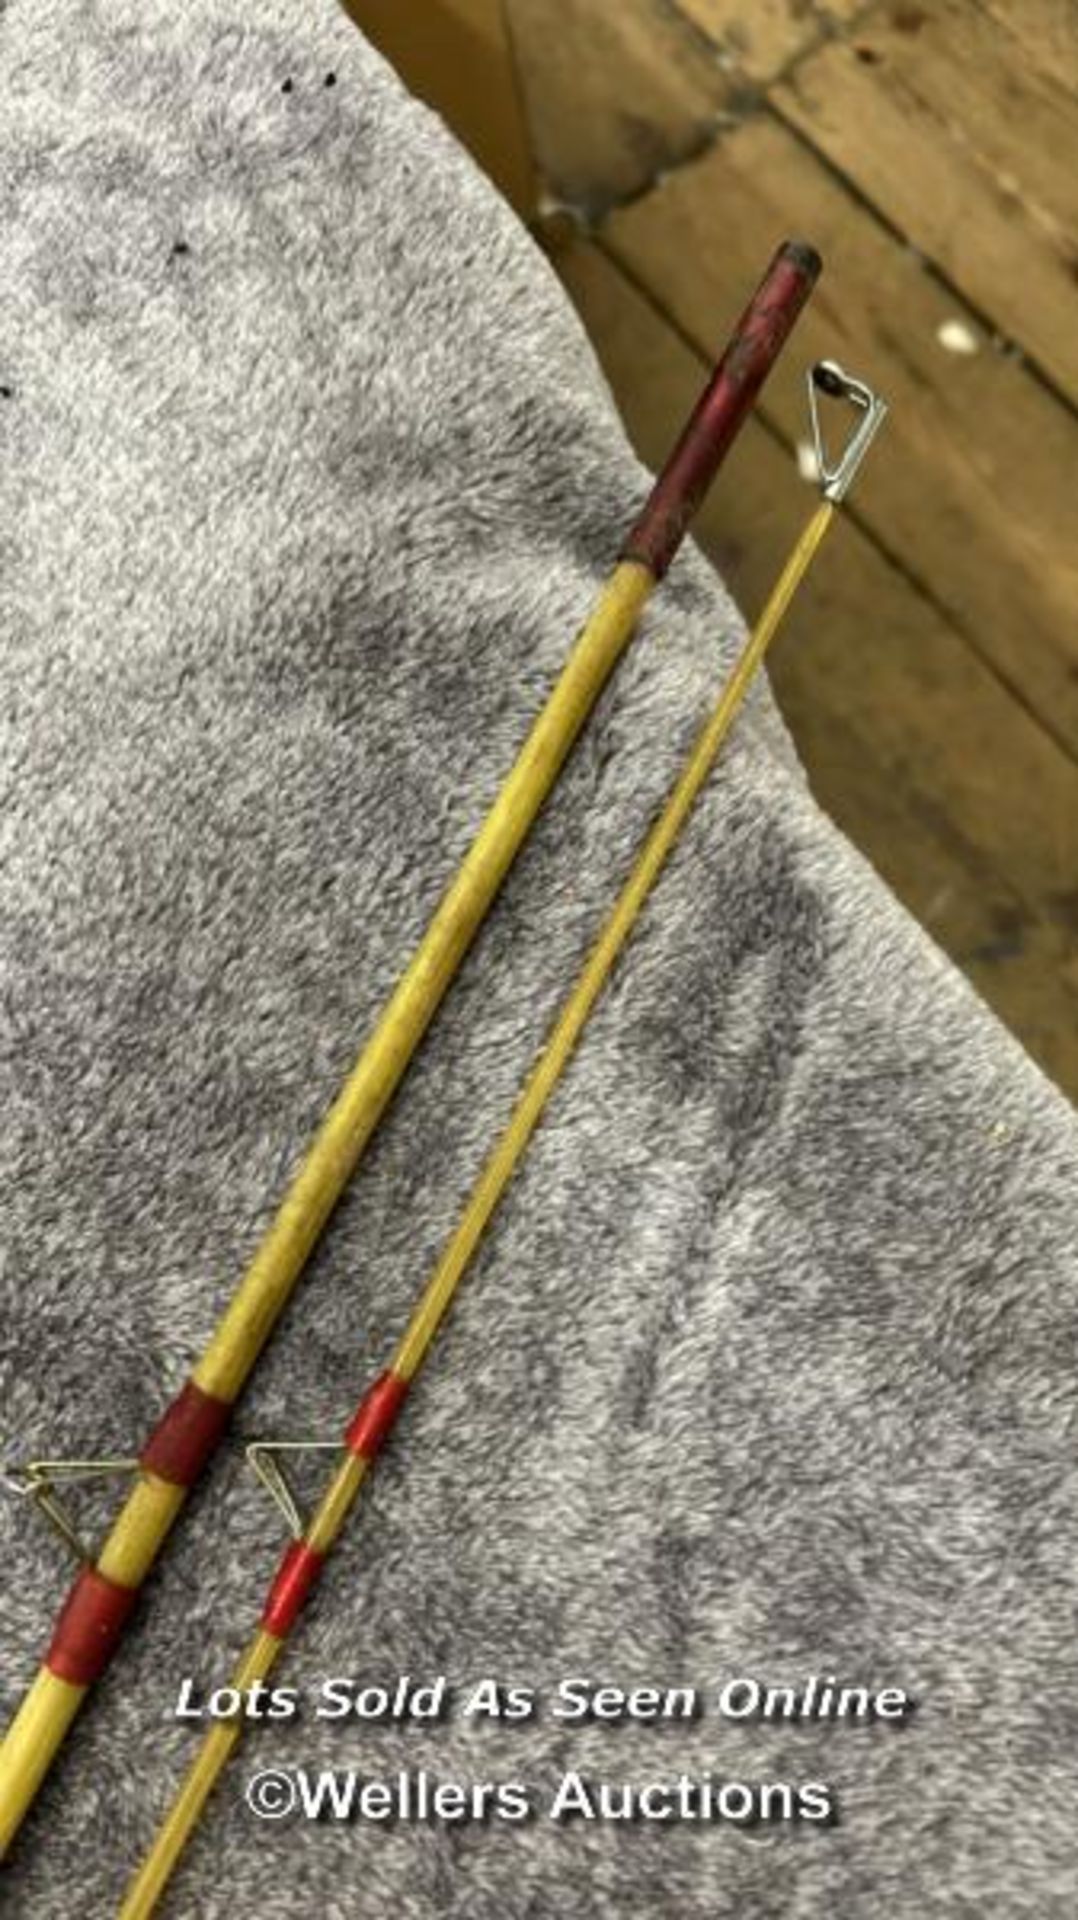 Vintage fibreglass fishing rod with cork handle, 265cm long with a Prince regent reel / AN16 - Image 3 of 4